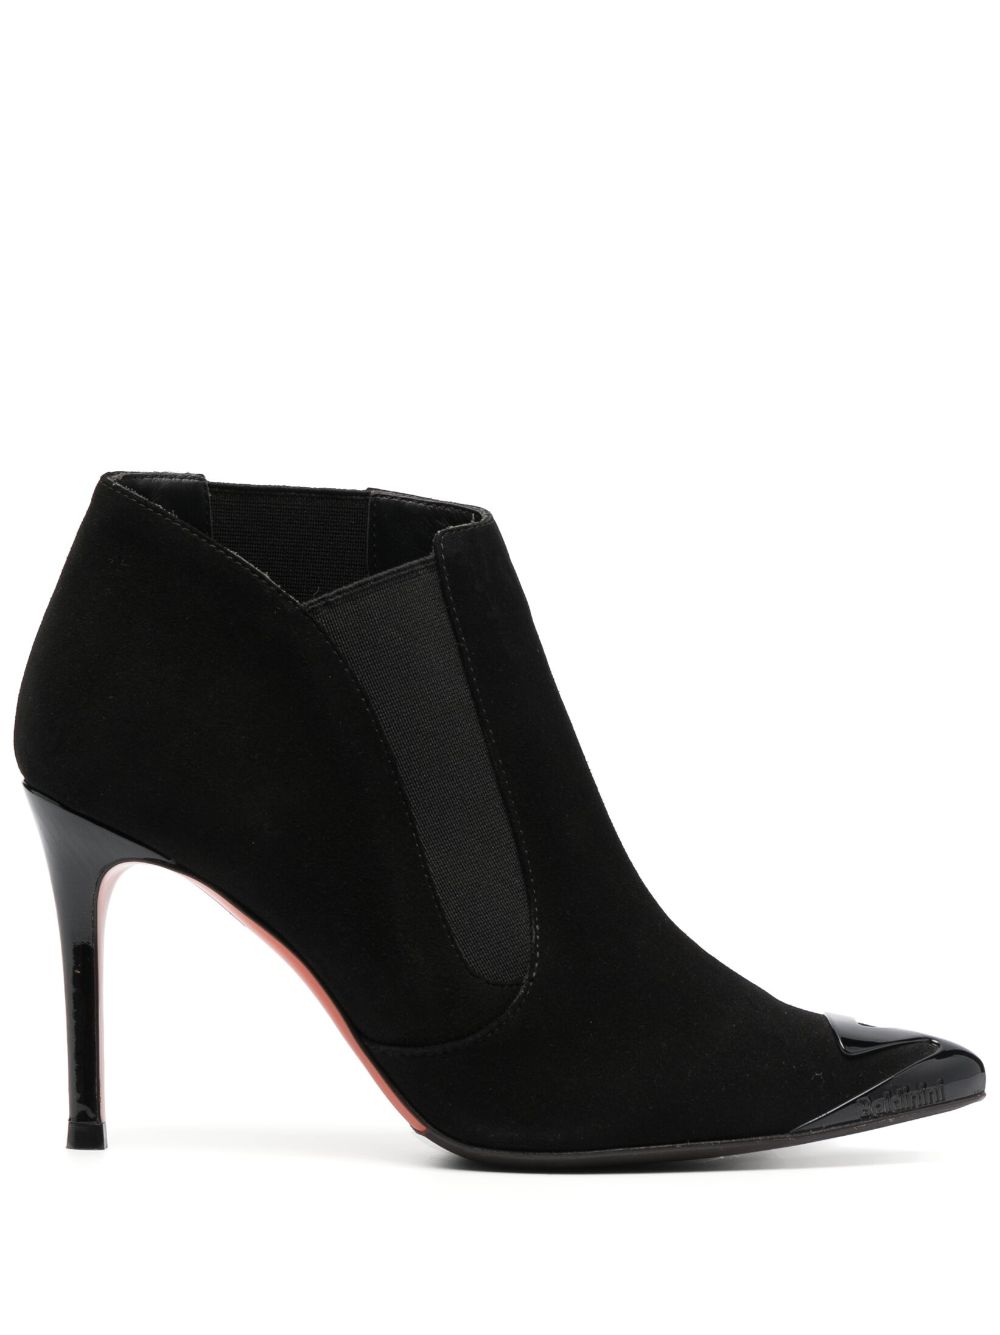 Baldinini 100mm suede ankle boots